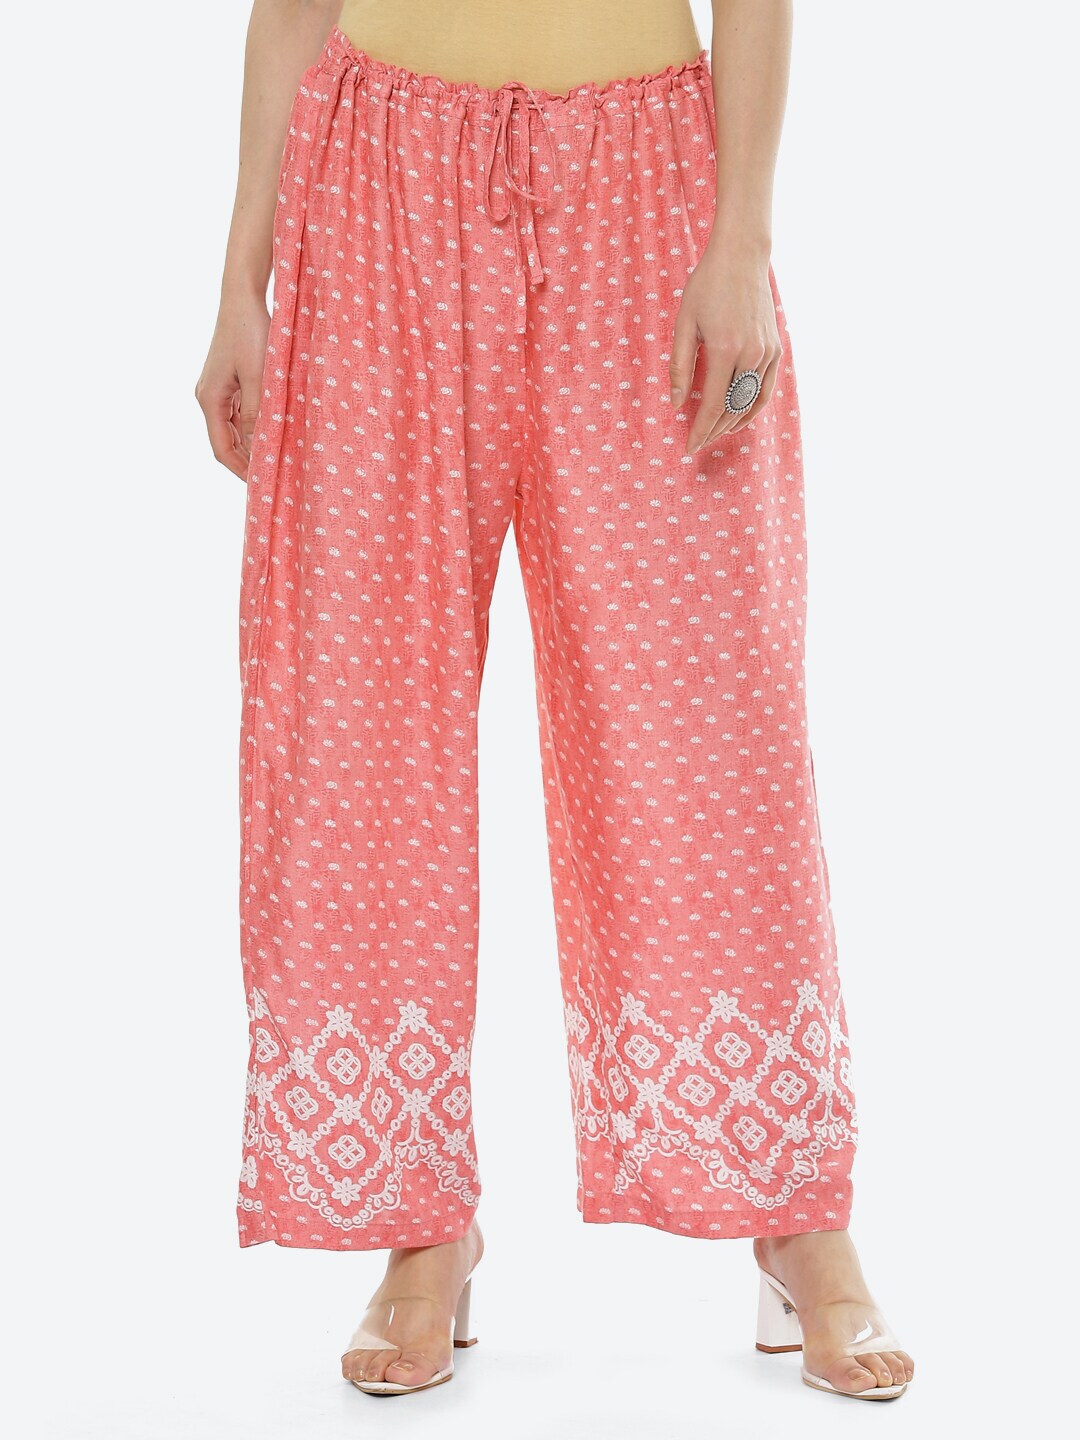 Biba Women Peach-Coloured & White Floral Printed Flared Ethnic Palazzos Price in India